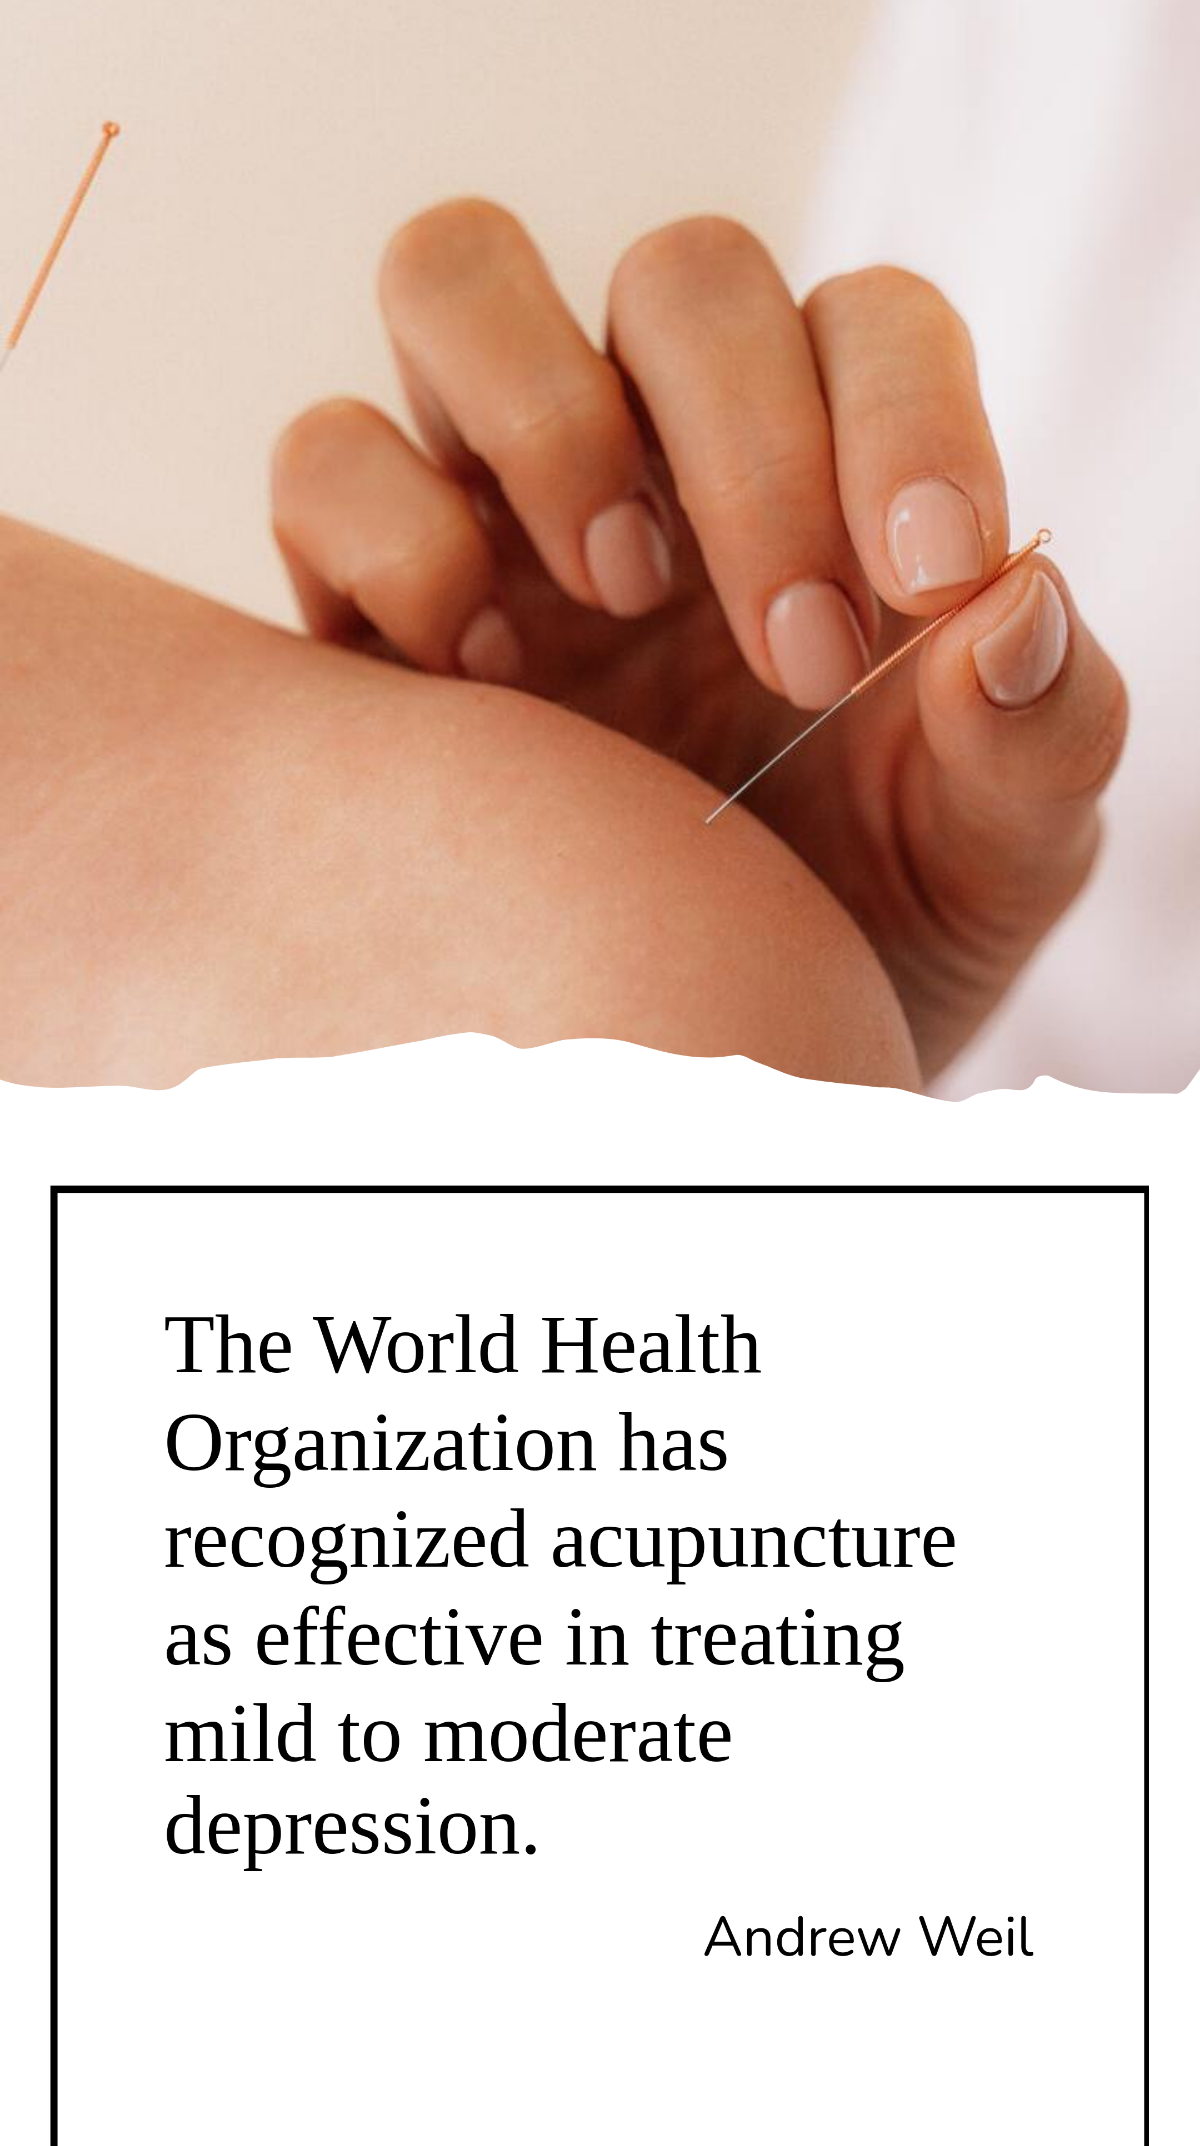 Andrew Weil - The World Health Organization has recognized acupuncture as effective in treating mild to moderate depression. Template